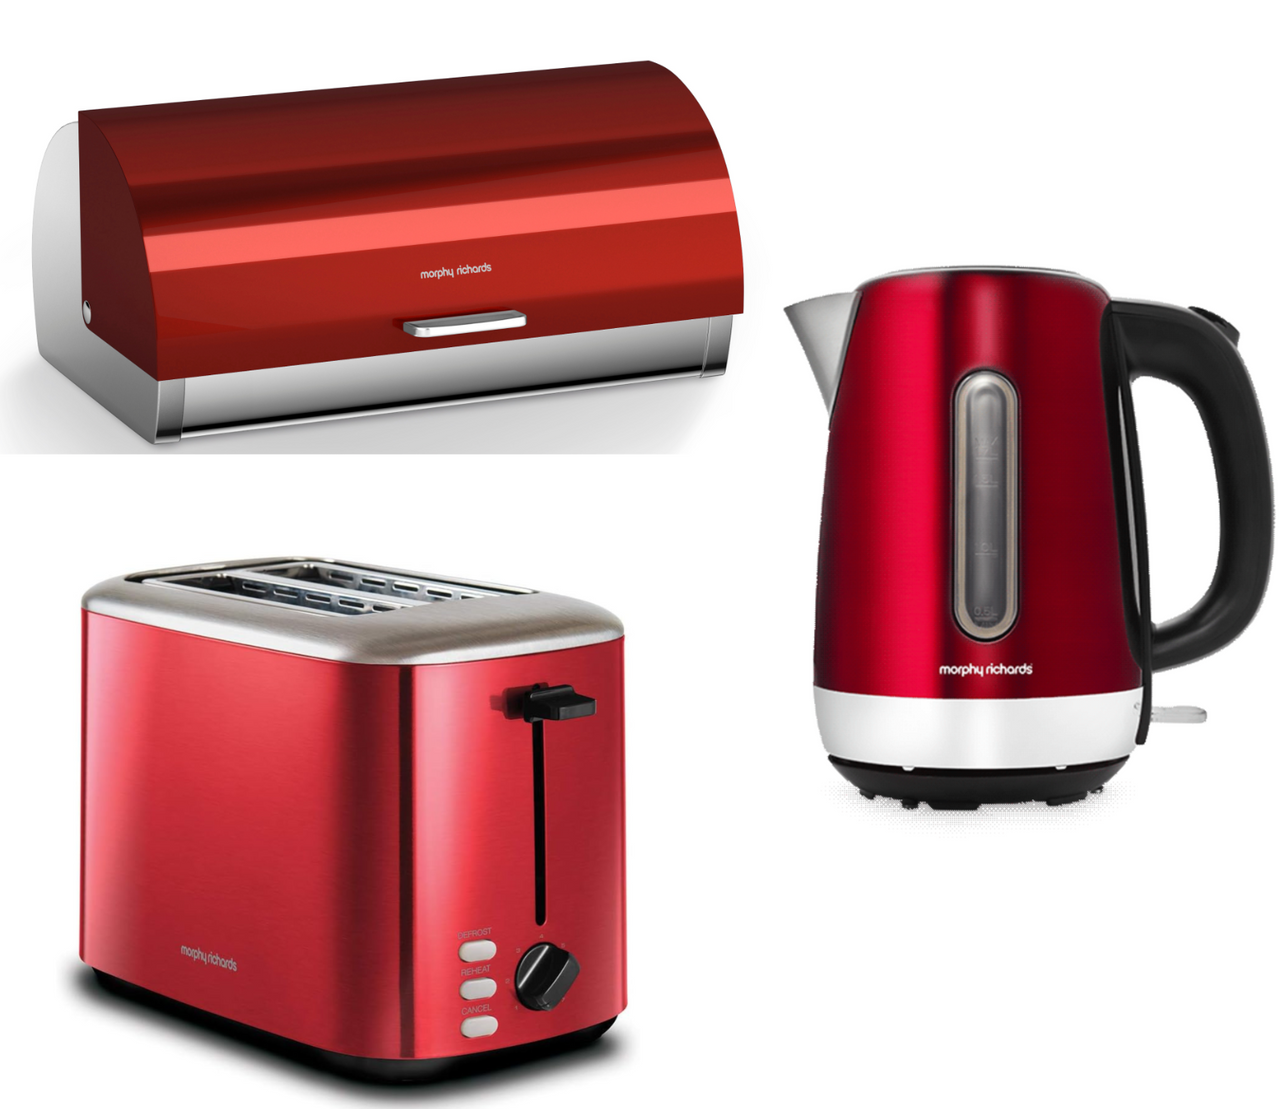 Morphy Richards Equip Red 1.7L 3KW Kettle, 2 Slice Toaster & Accents Bread Bin Kitchen Set